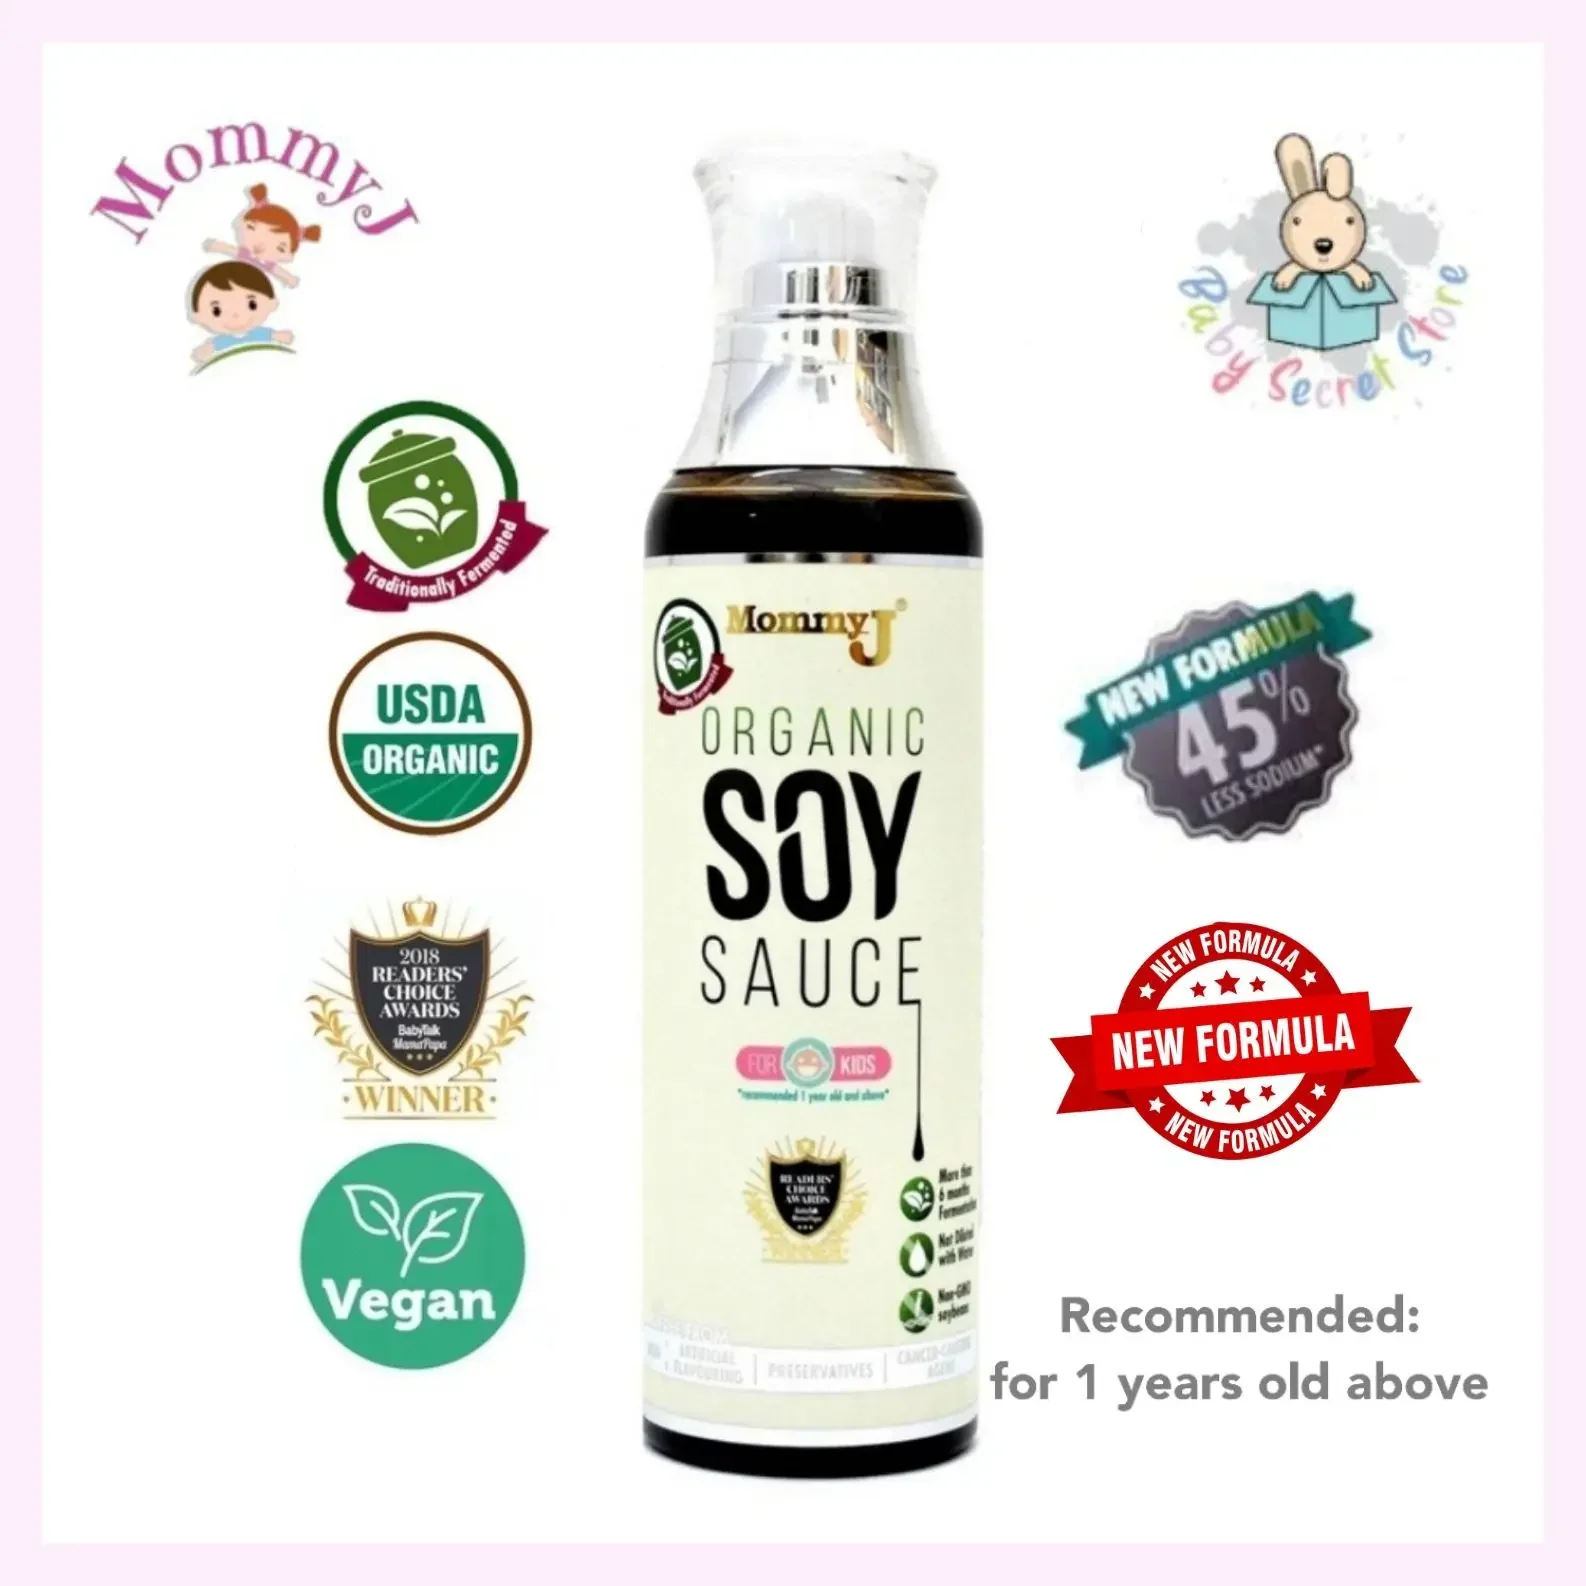 MommyJ Traditionally Fermented Organic Baby Soy Sauce